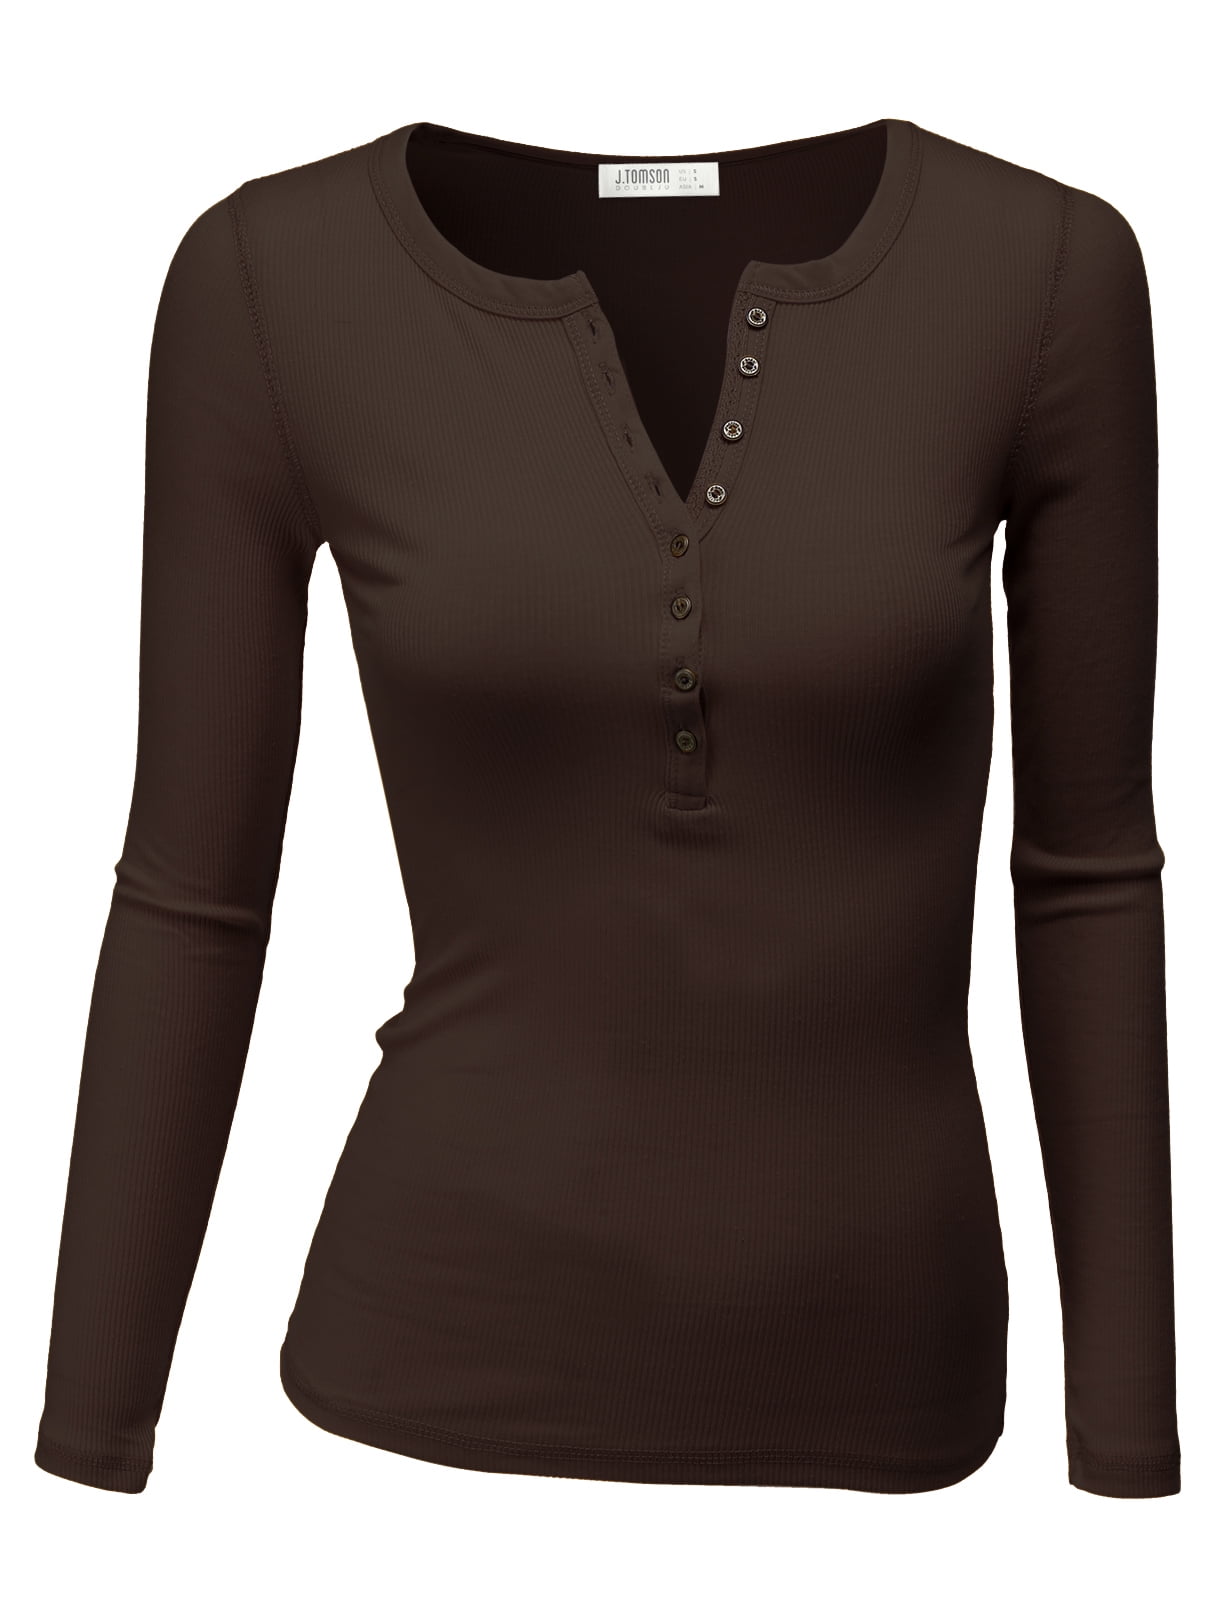 Doublju Womens Long Sleeve Thermal Henley Top with Female Plus Size 